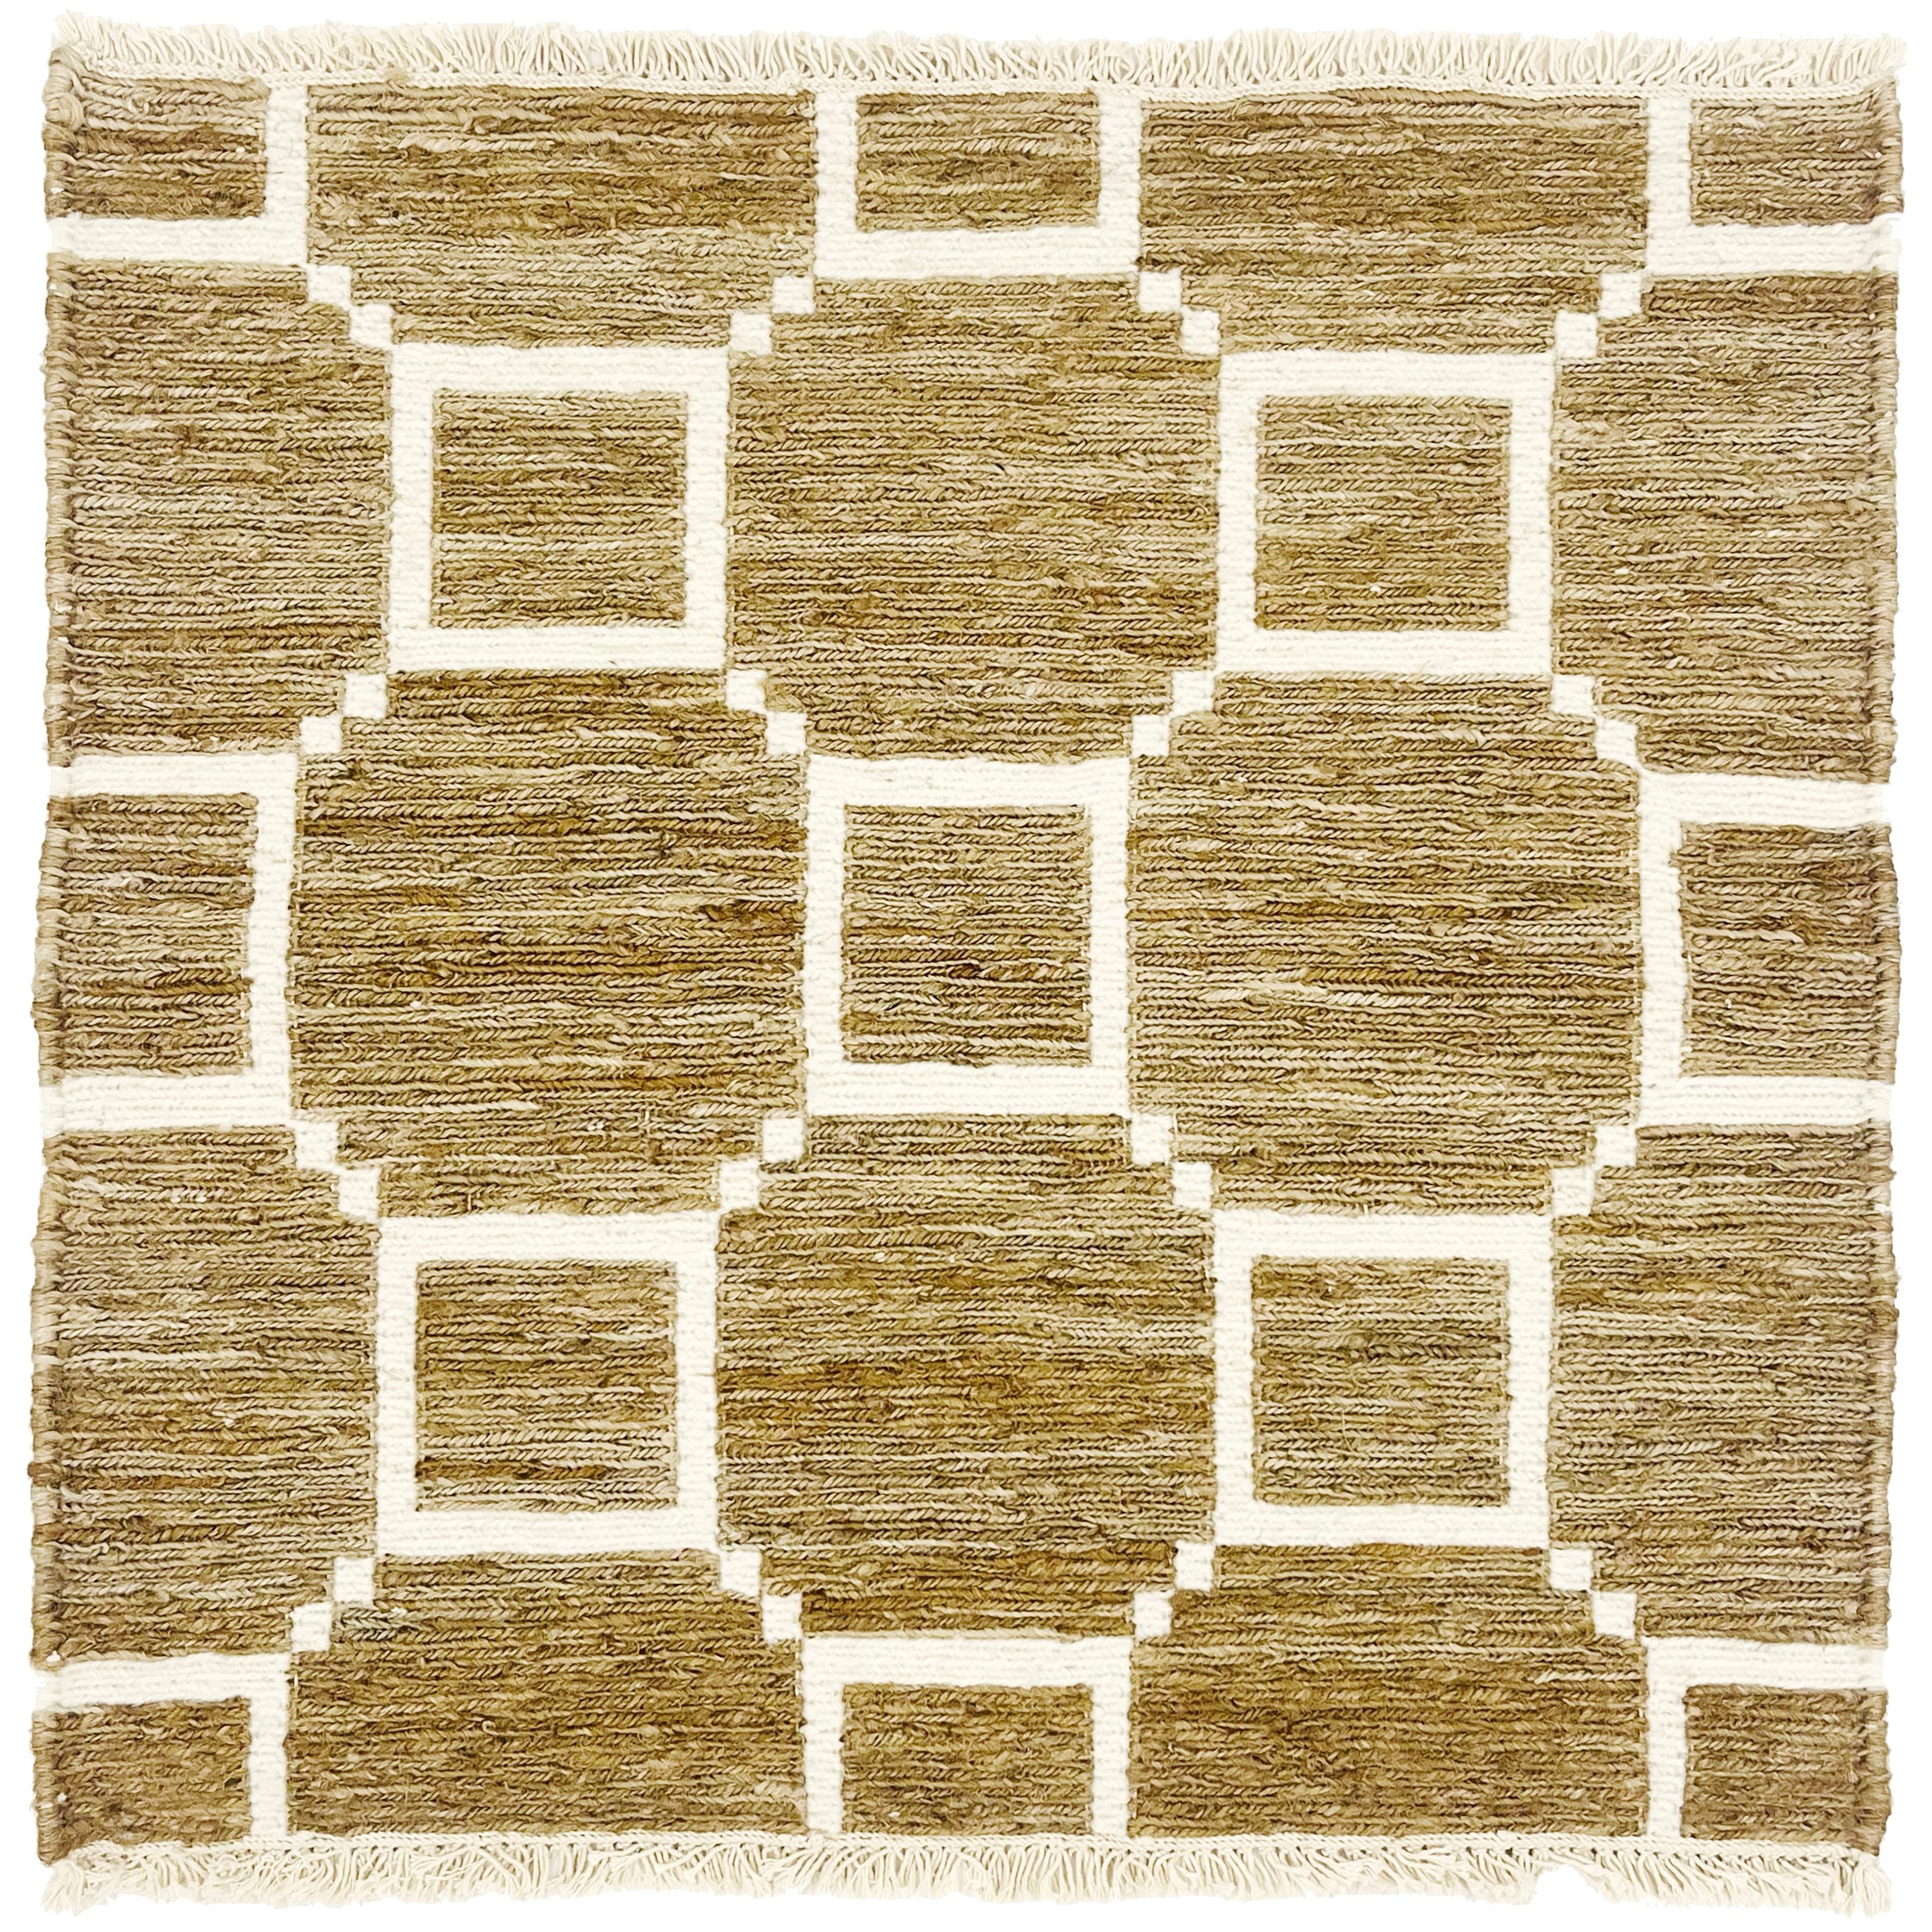 Woven rug swatch with a ivory lattice pattern on a taupe field with ivory fringe edges at top and bottom